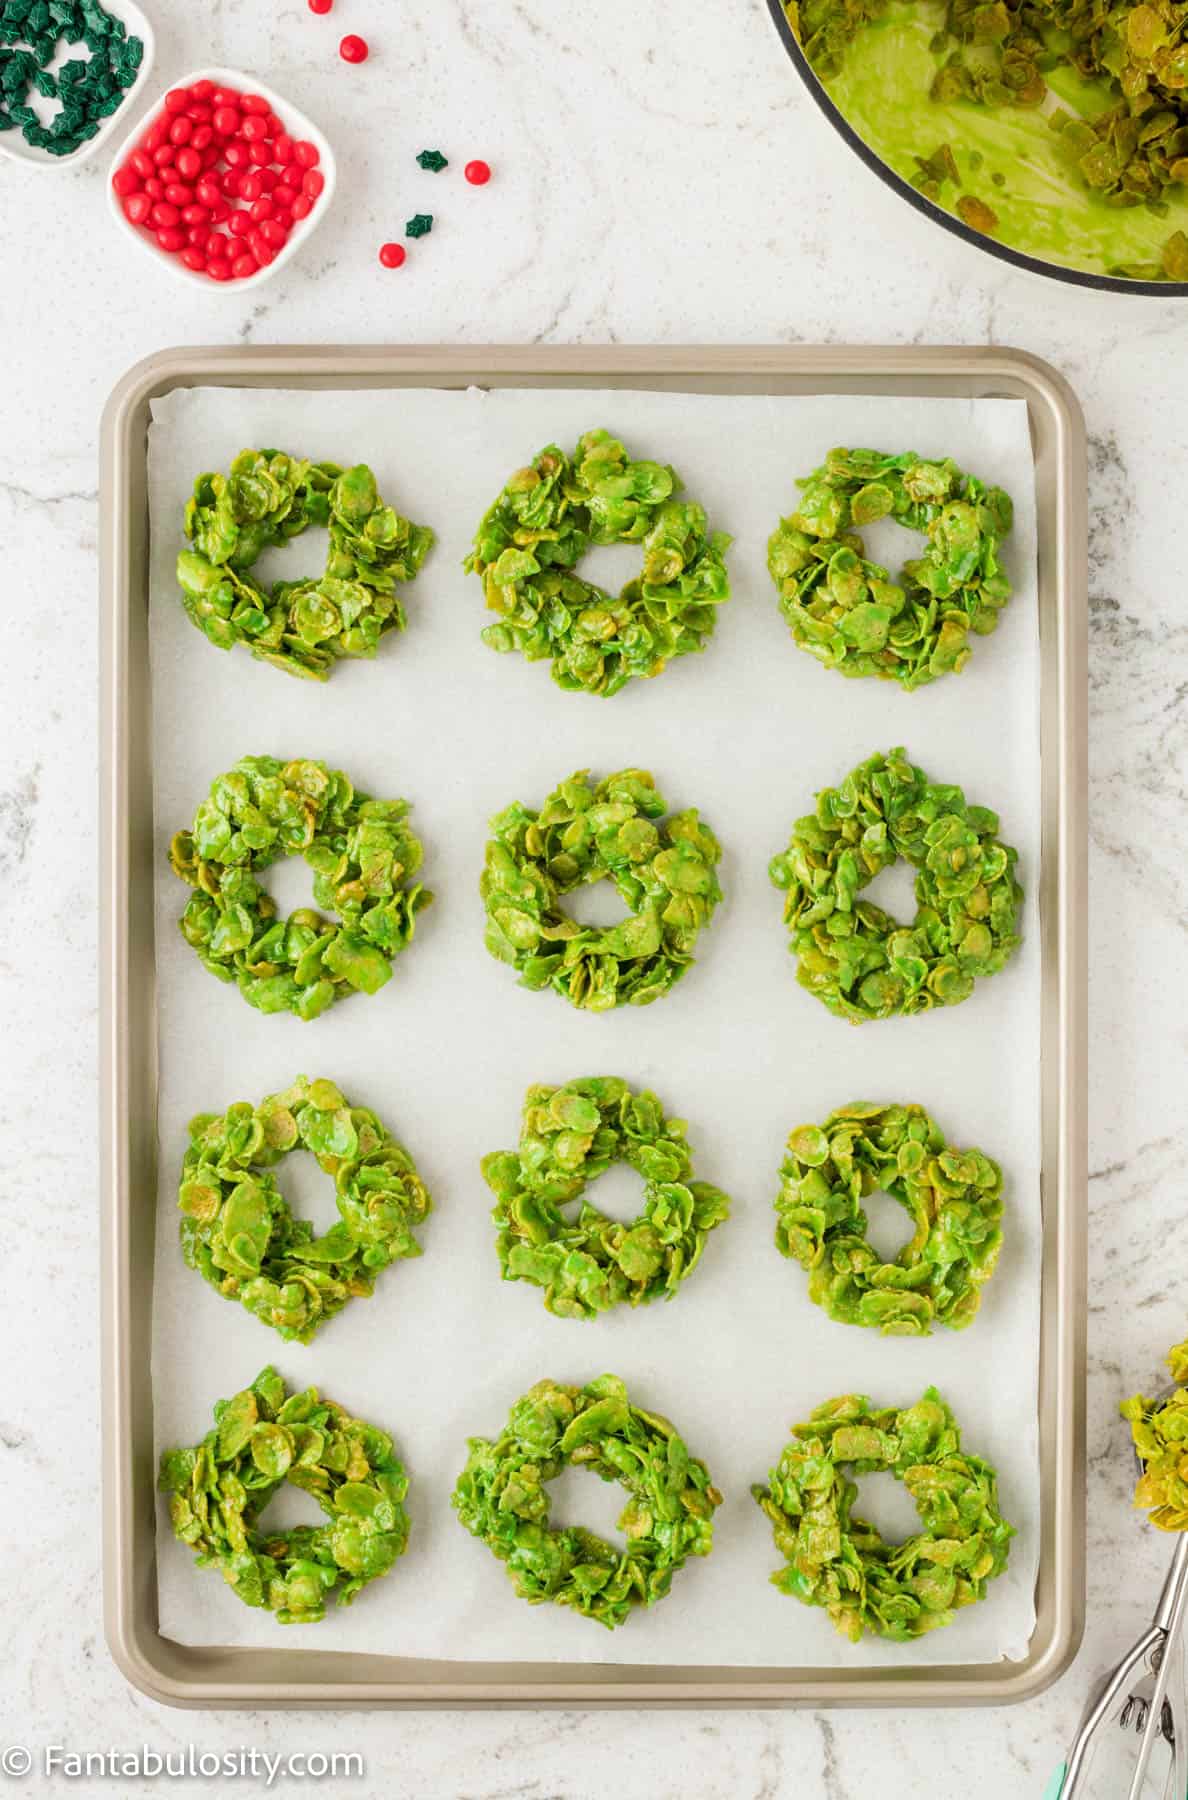 Green marshmallow coated cornflakes have been shaped into wreath shapes on a parchment lined baking sheet